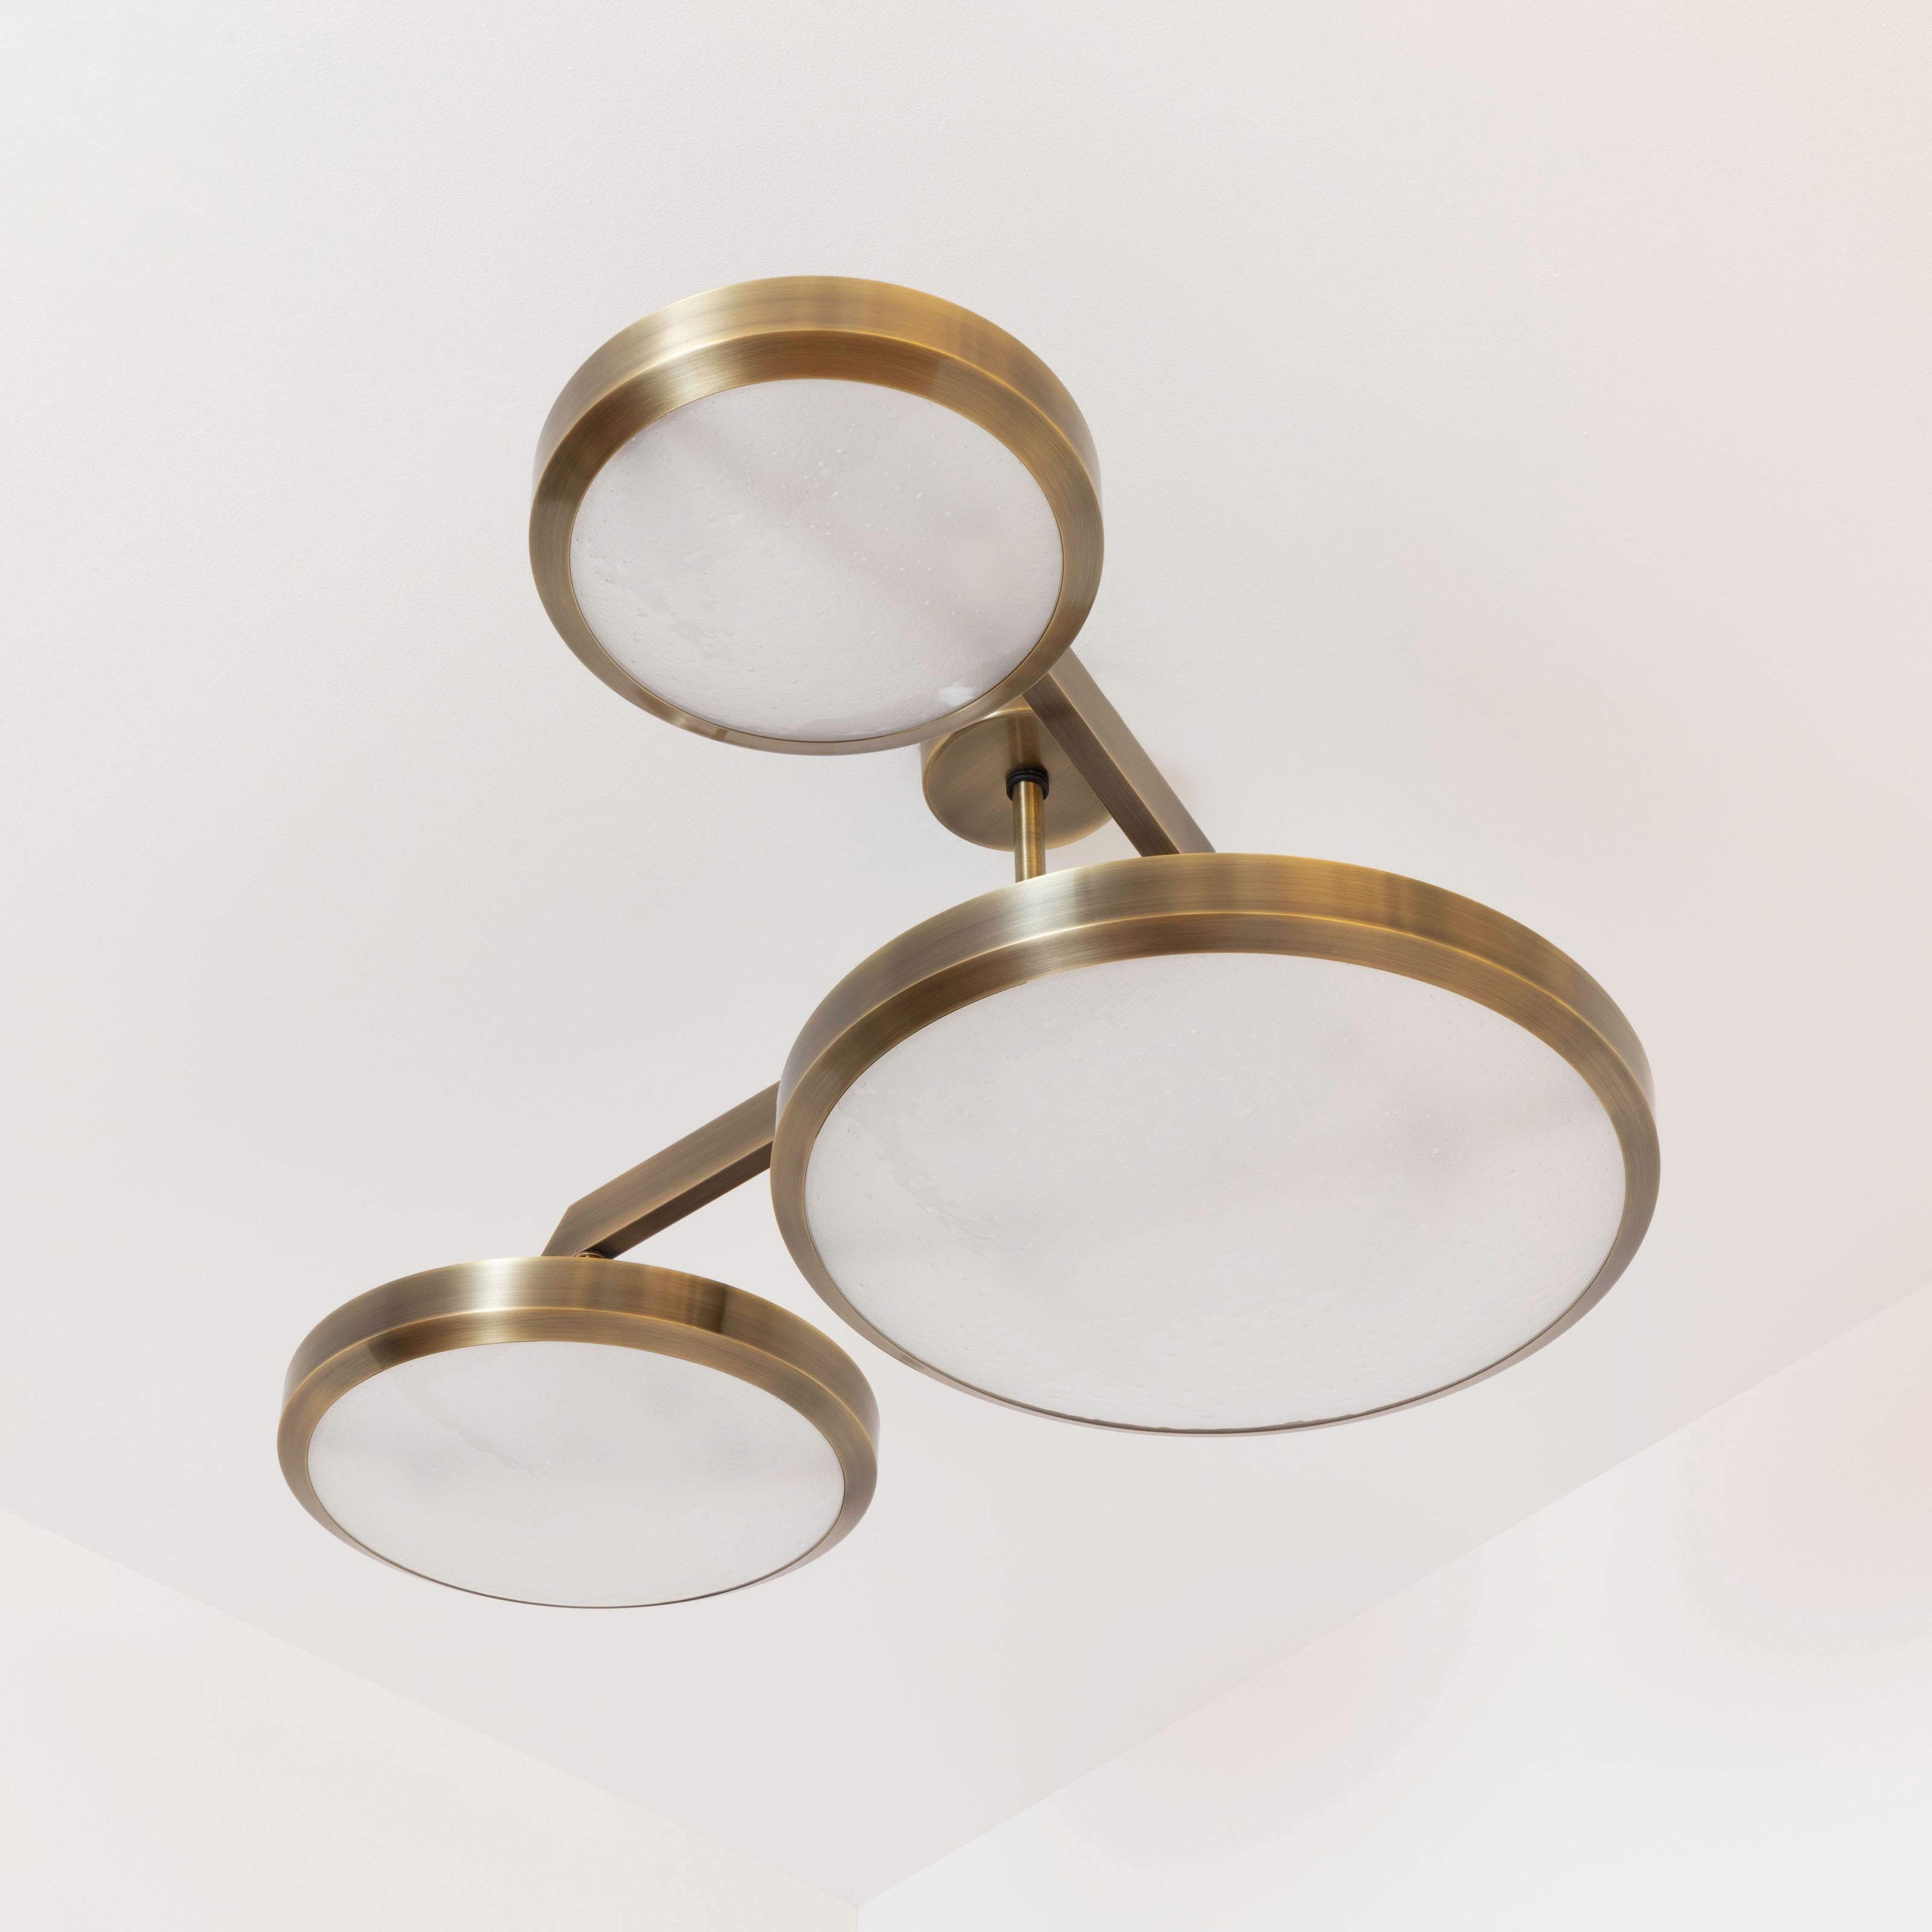 Zeta Ceiling Light by Gaspare Asaro - Polished Brass Finish For Sale 2